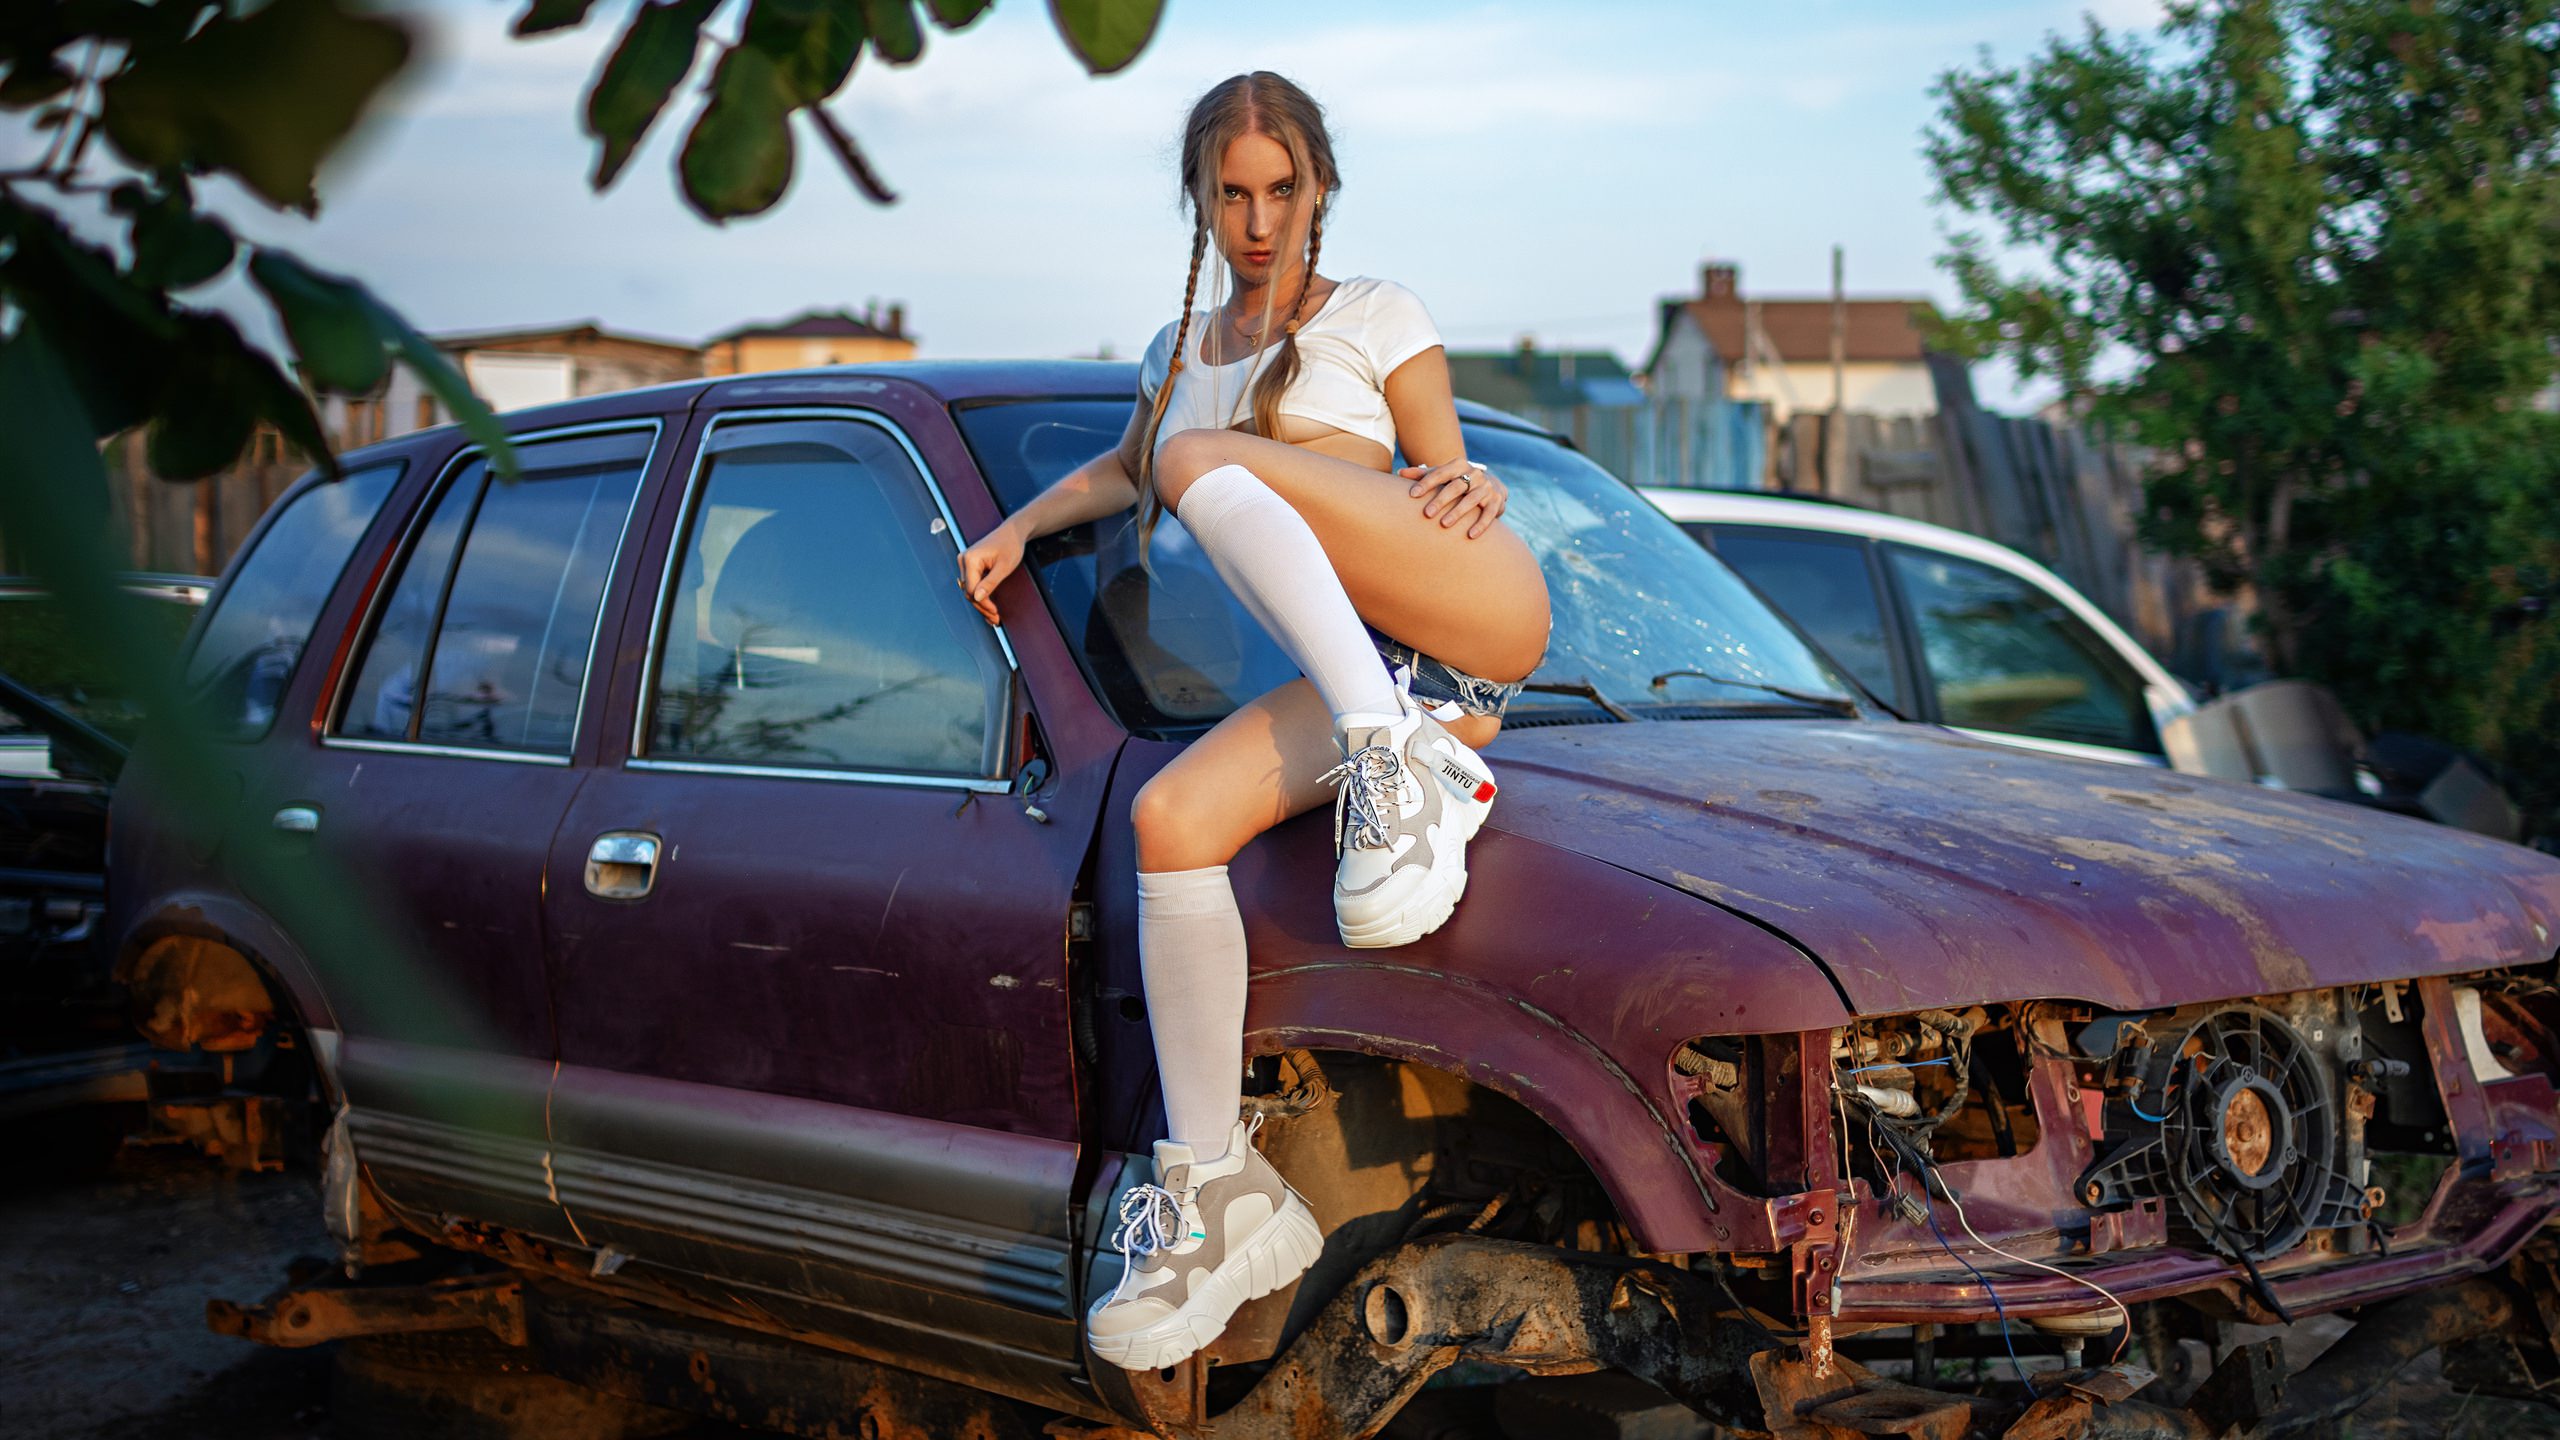 People 2560x1440 women jean shorts twintails tank top skinny women outdoors ribs junkyard underboob white stockings sneakers ass sitting boobs necklace women with cars model braided hair brunette